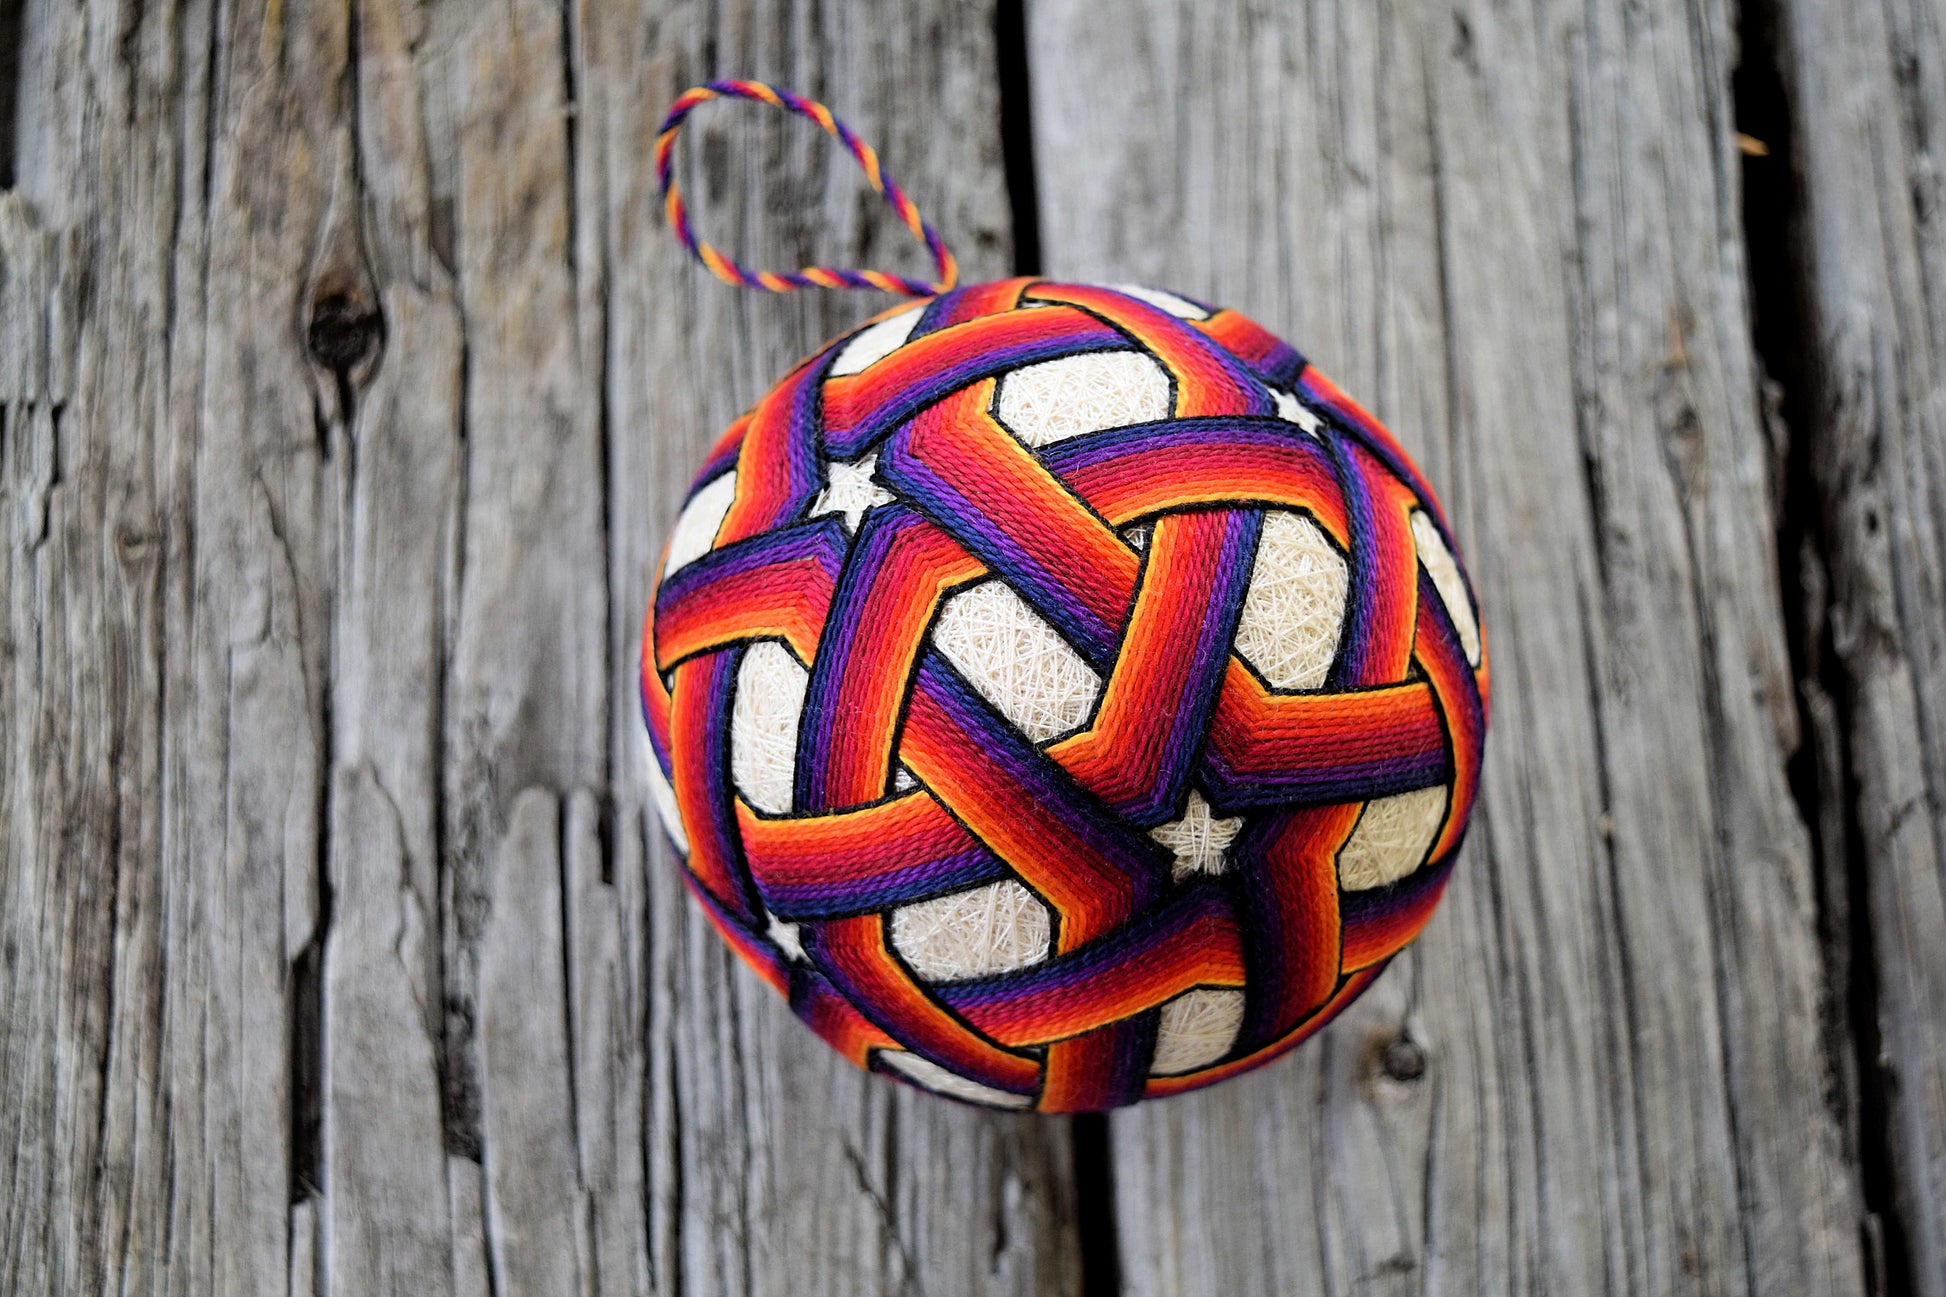 Temari embroidered in deep rainbow tones with stars and triangles